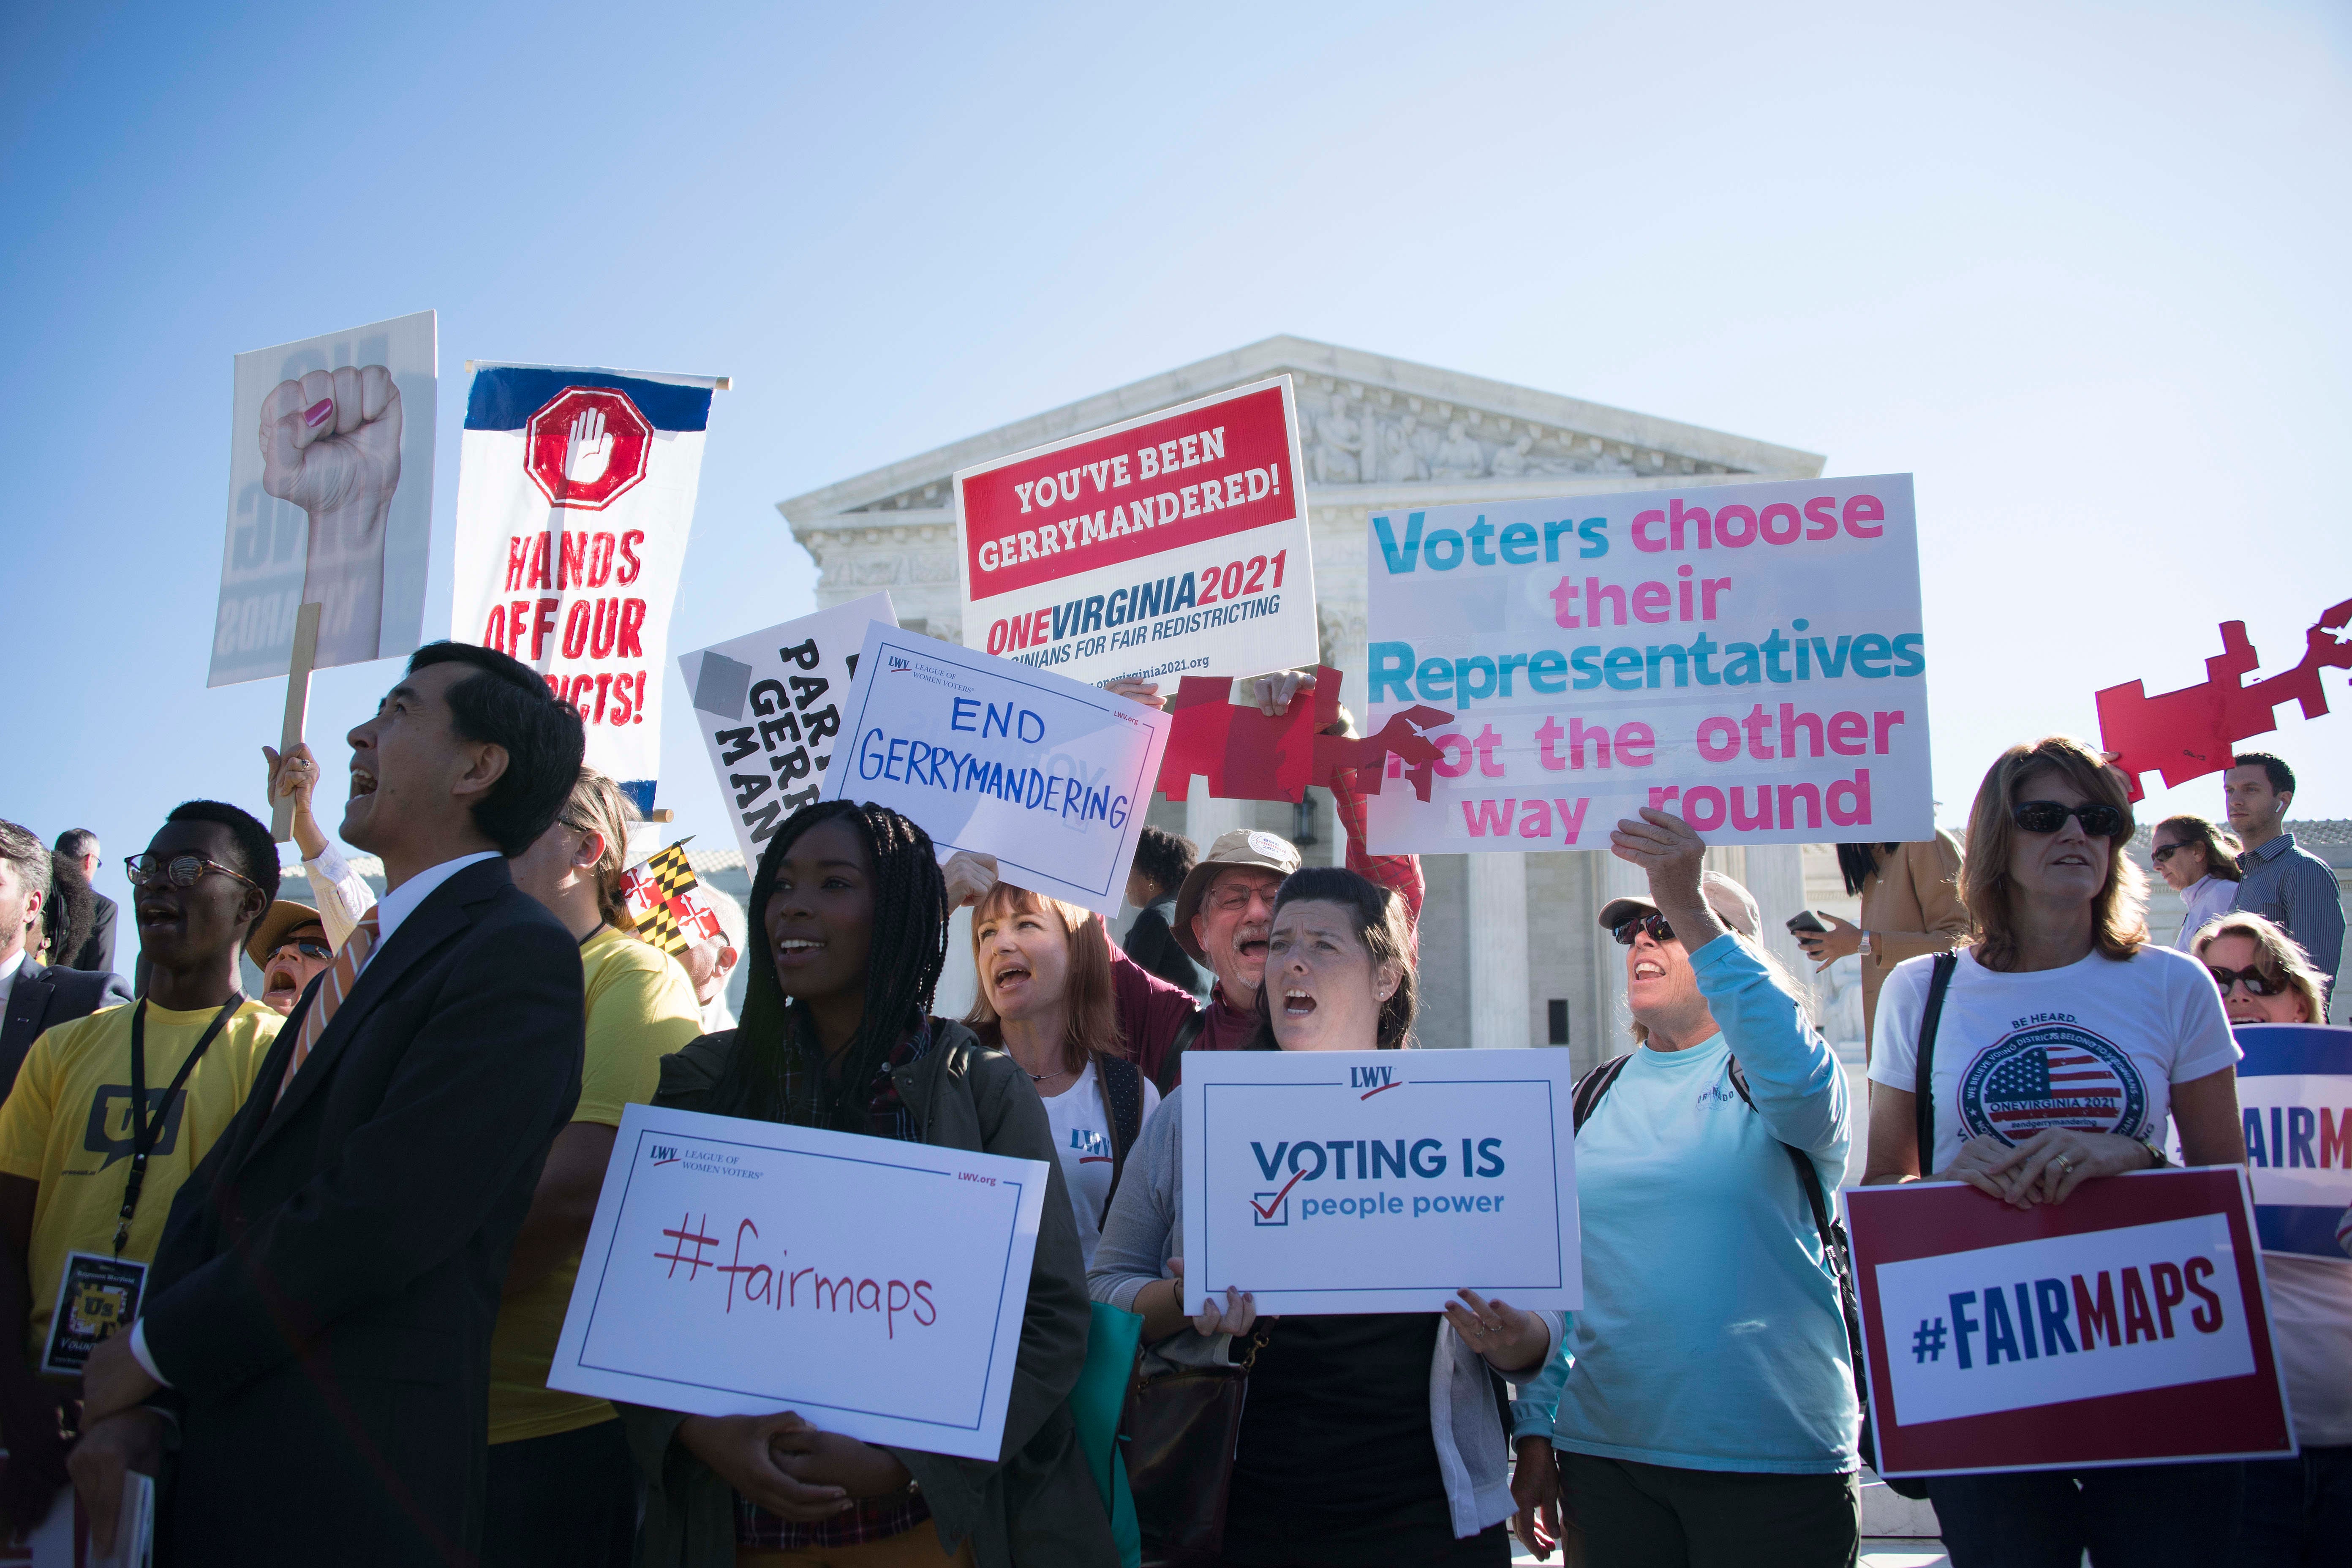 Demonstrators protest outside the US Supreme Court in Washington, DC, October 3, 2017, as the court hears arguments against gerrymandering